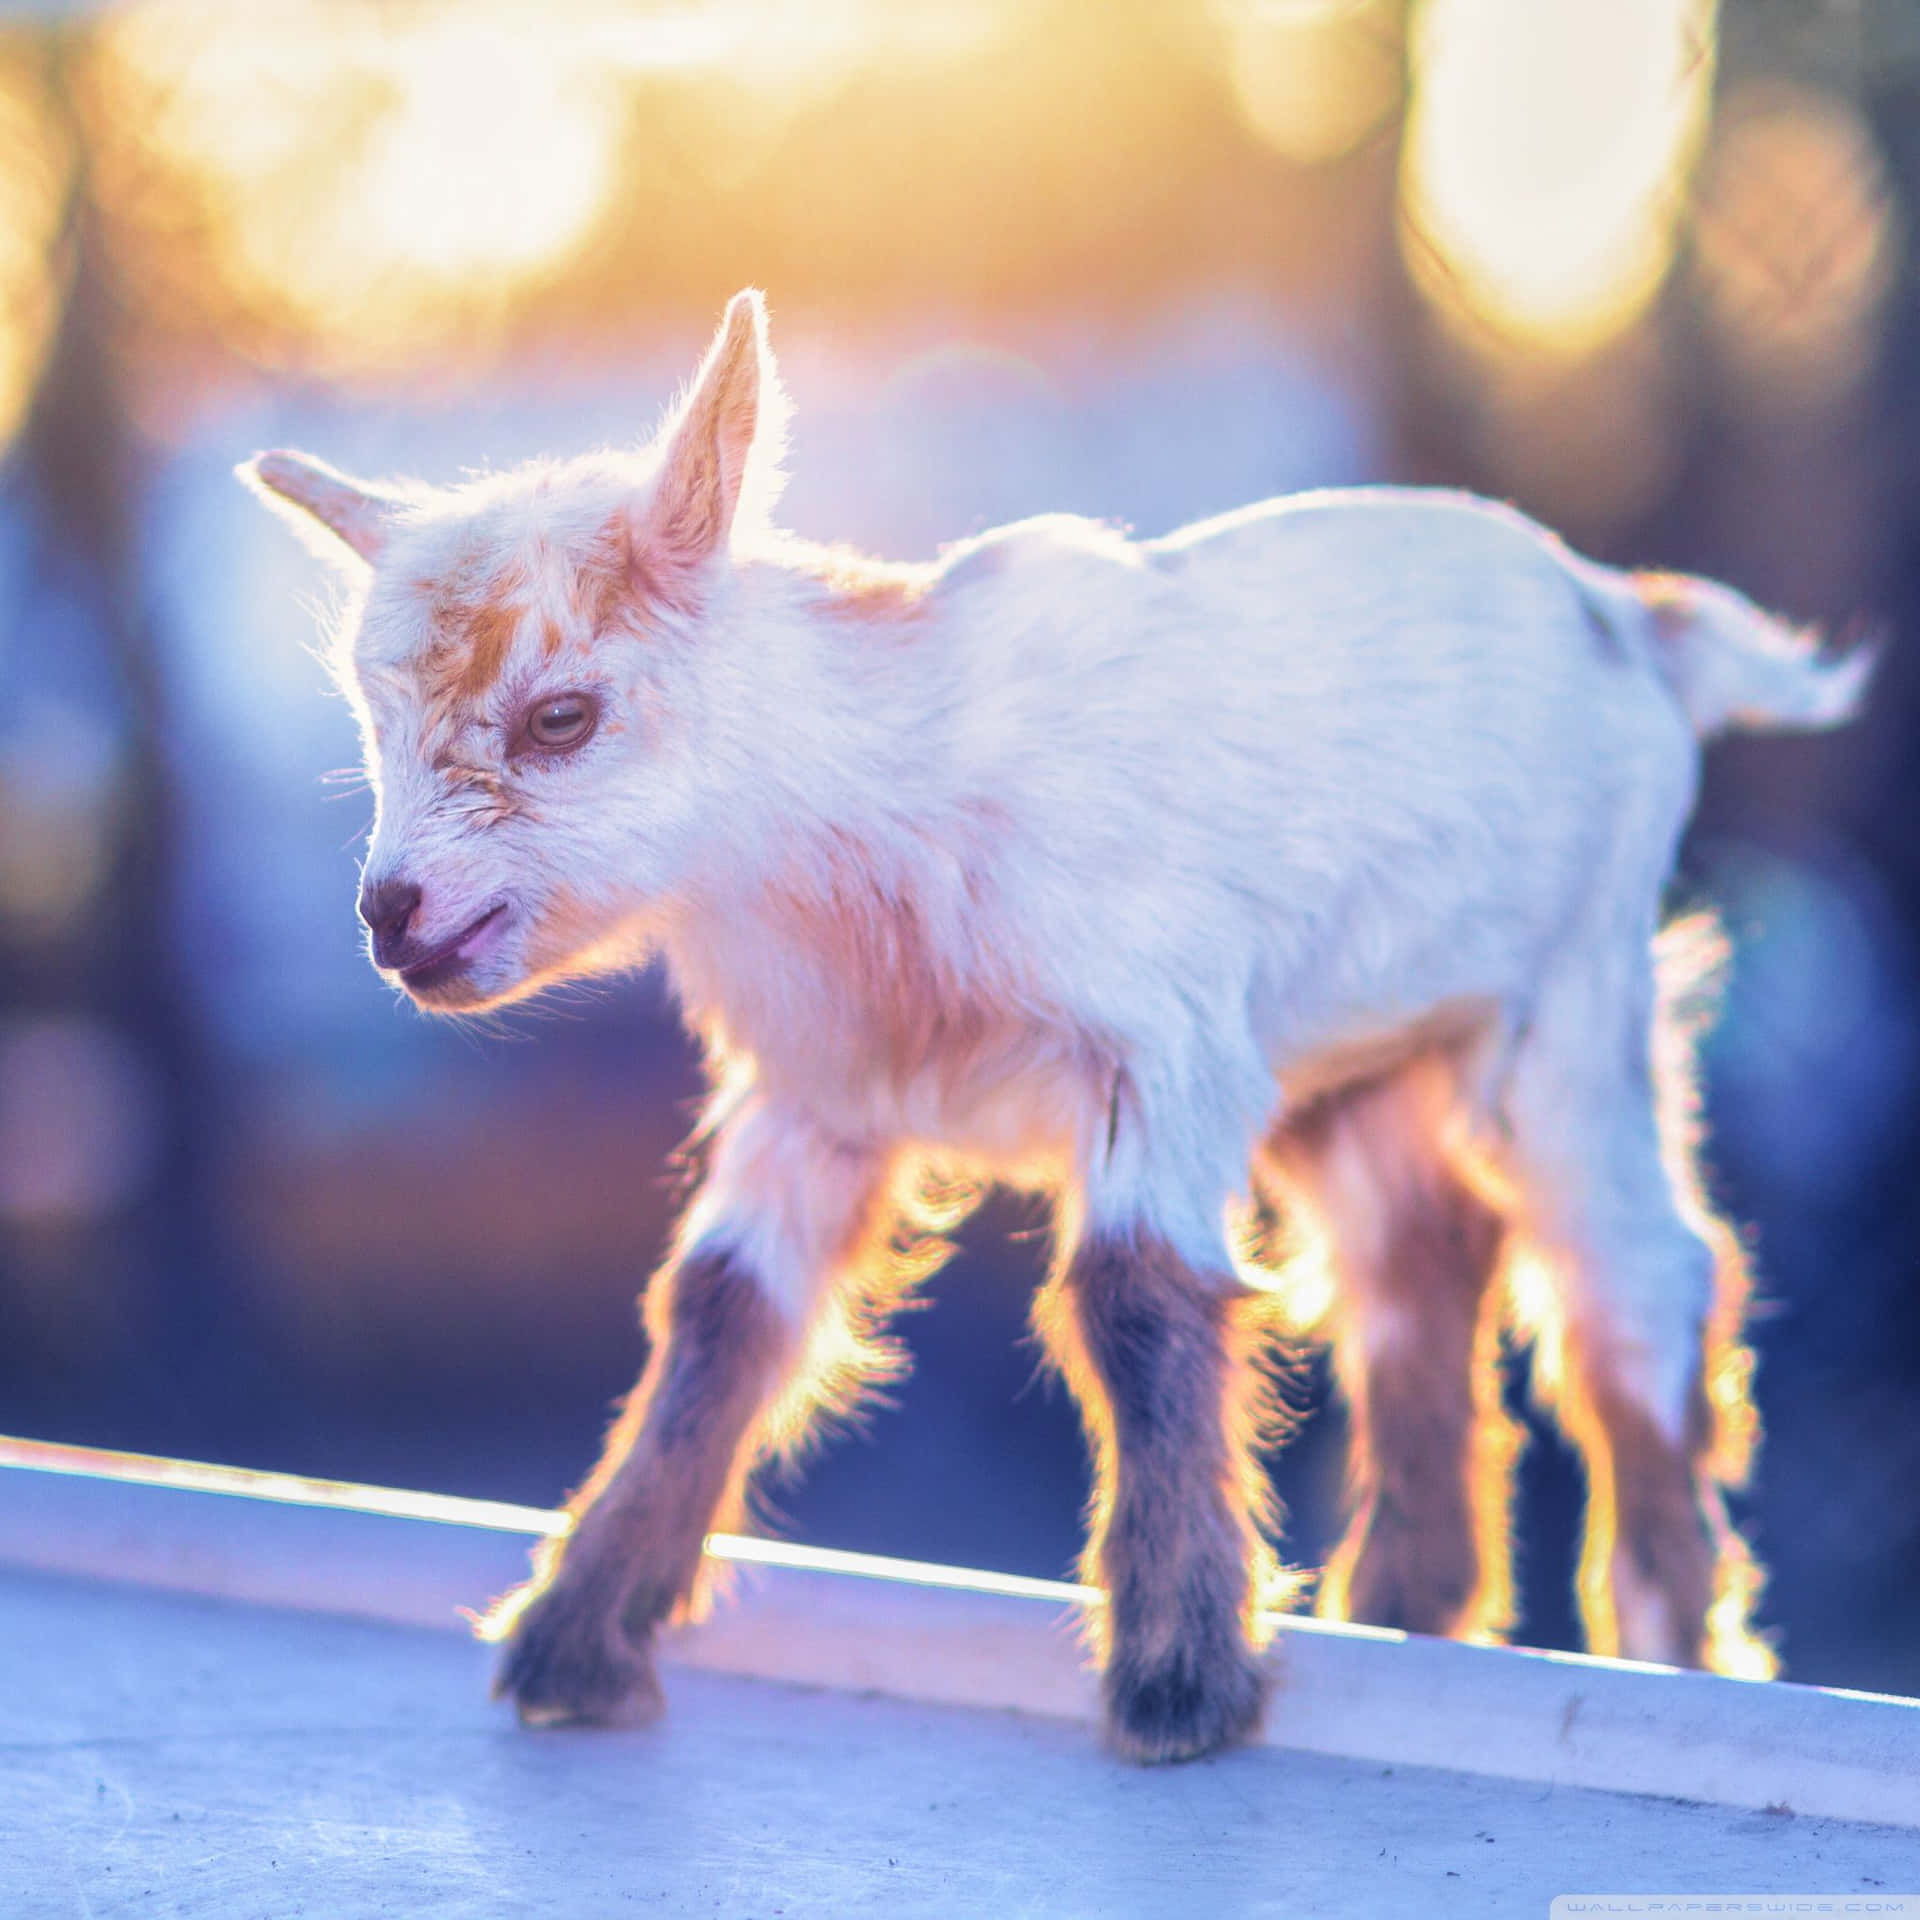 Cute Goat Golden Hour Picture